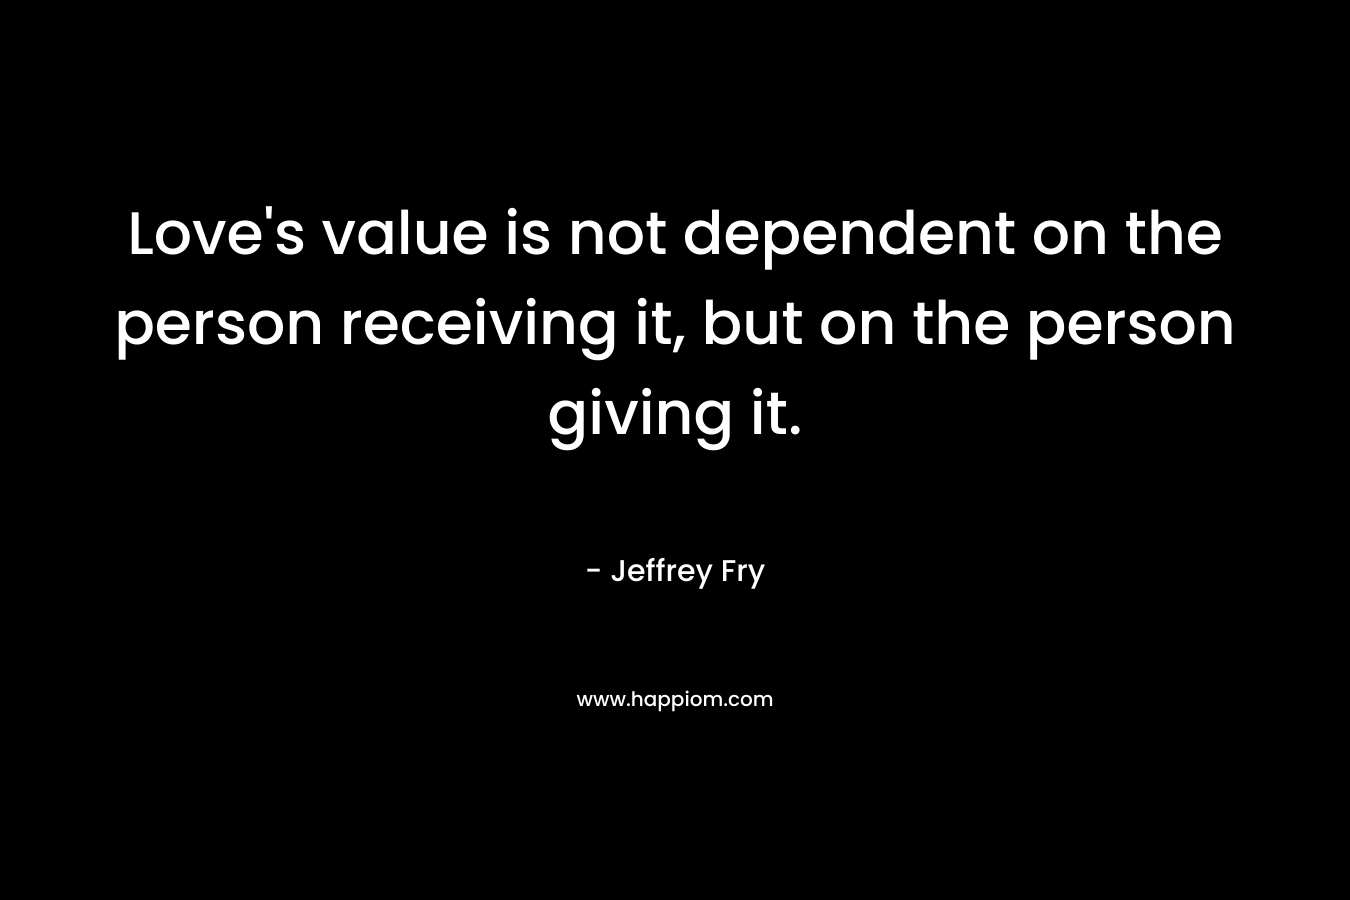 Love's value is not dependent on the person receiving it, but on the person giving it.